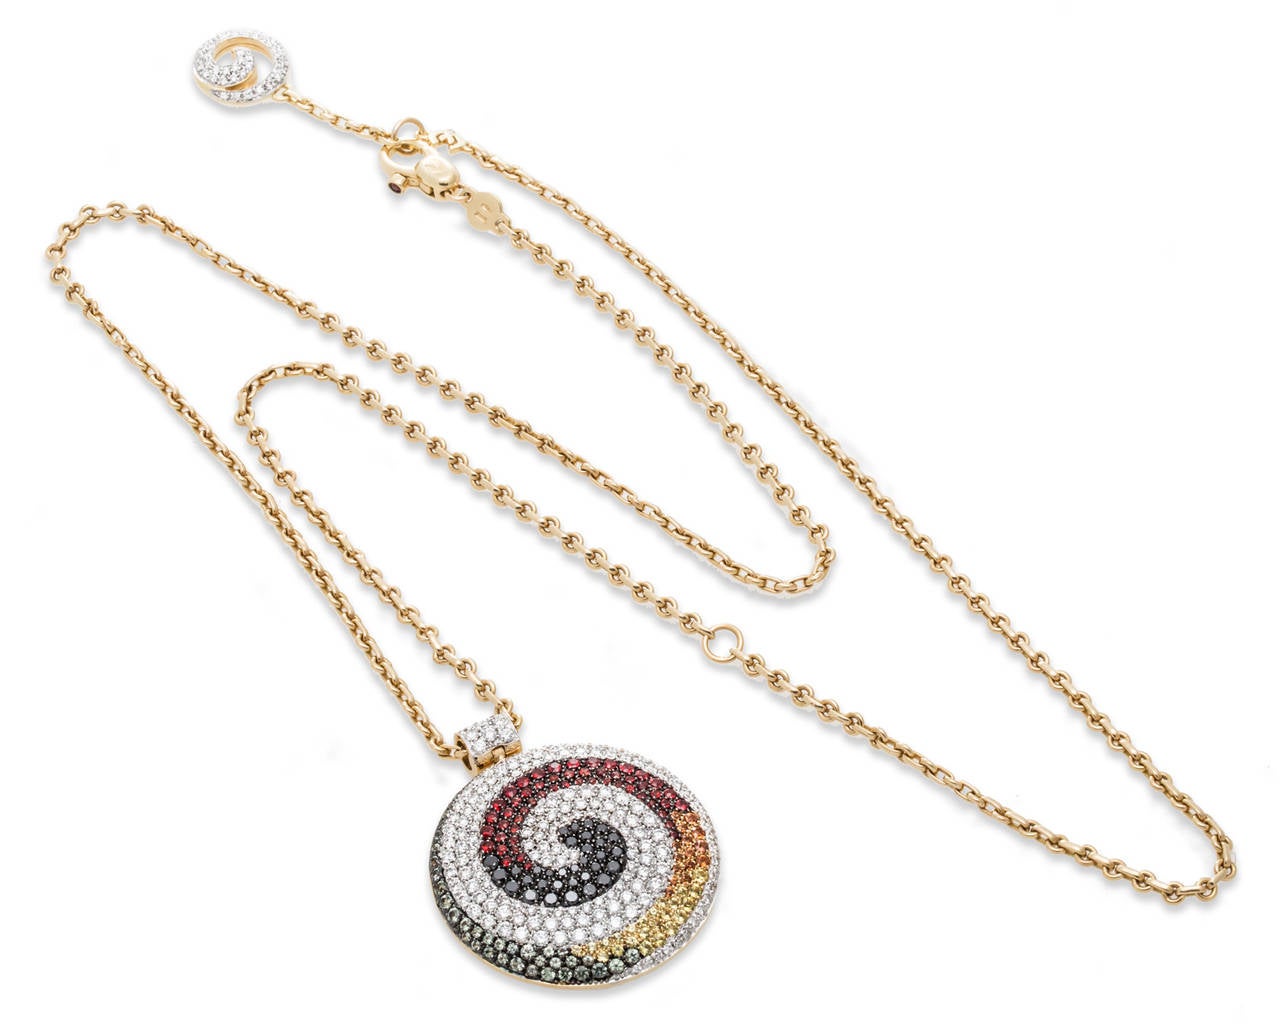 Valente Milano diamond and multi color sapphire, swirl pendant and earring set in 18K yellow gold. Single ruby and diamond charm on clasp. Pendant Length 1.82